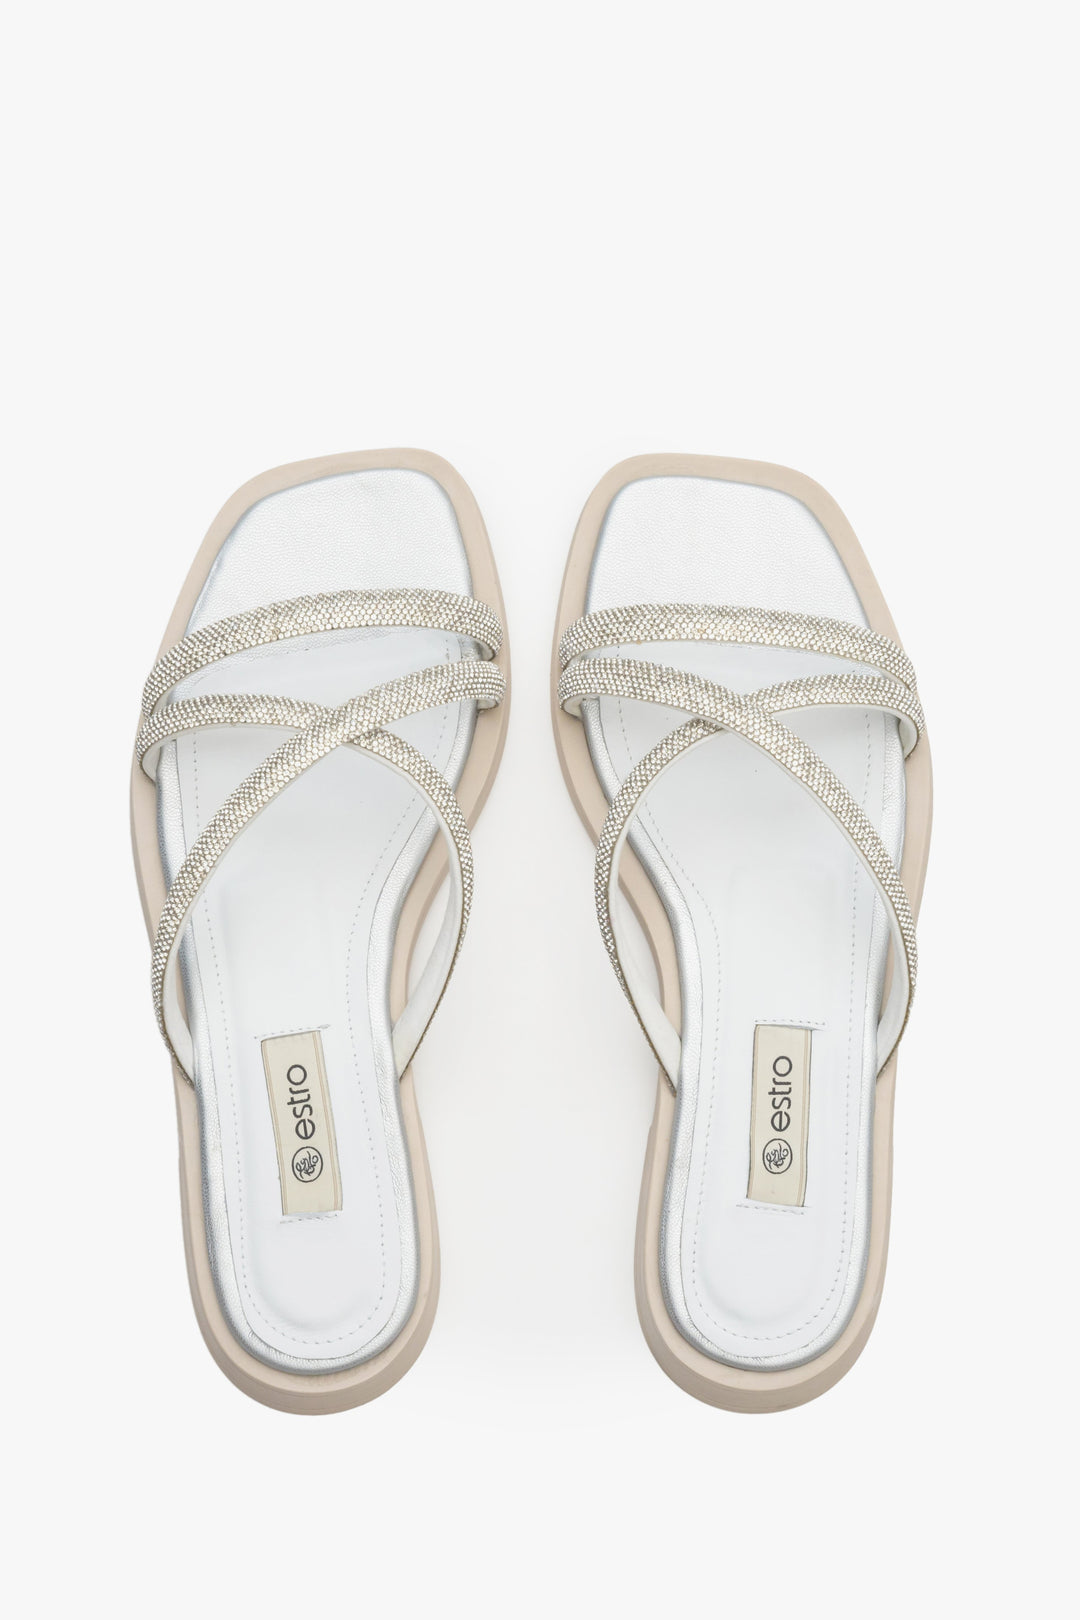 Comfy and stylish women's slide sandals on a flat heel by Estro in silver colour.